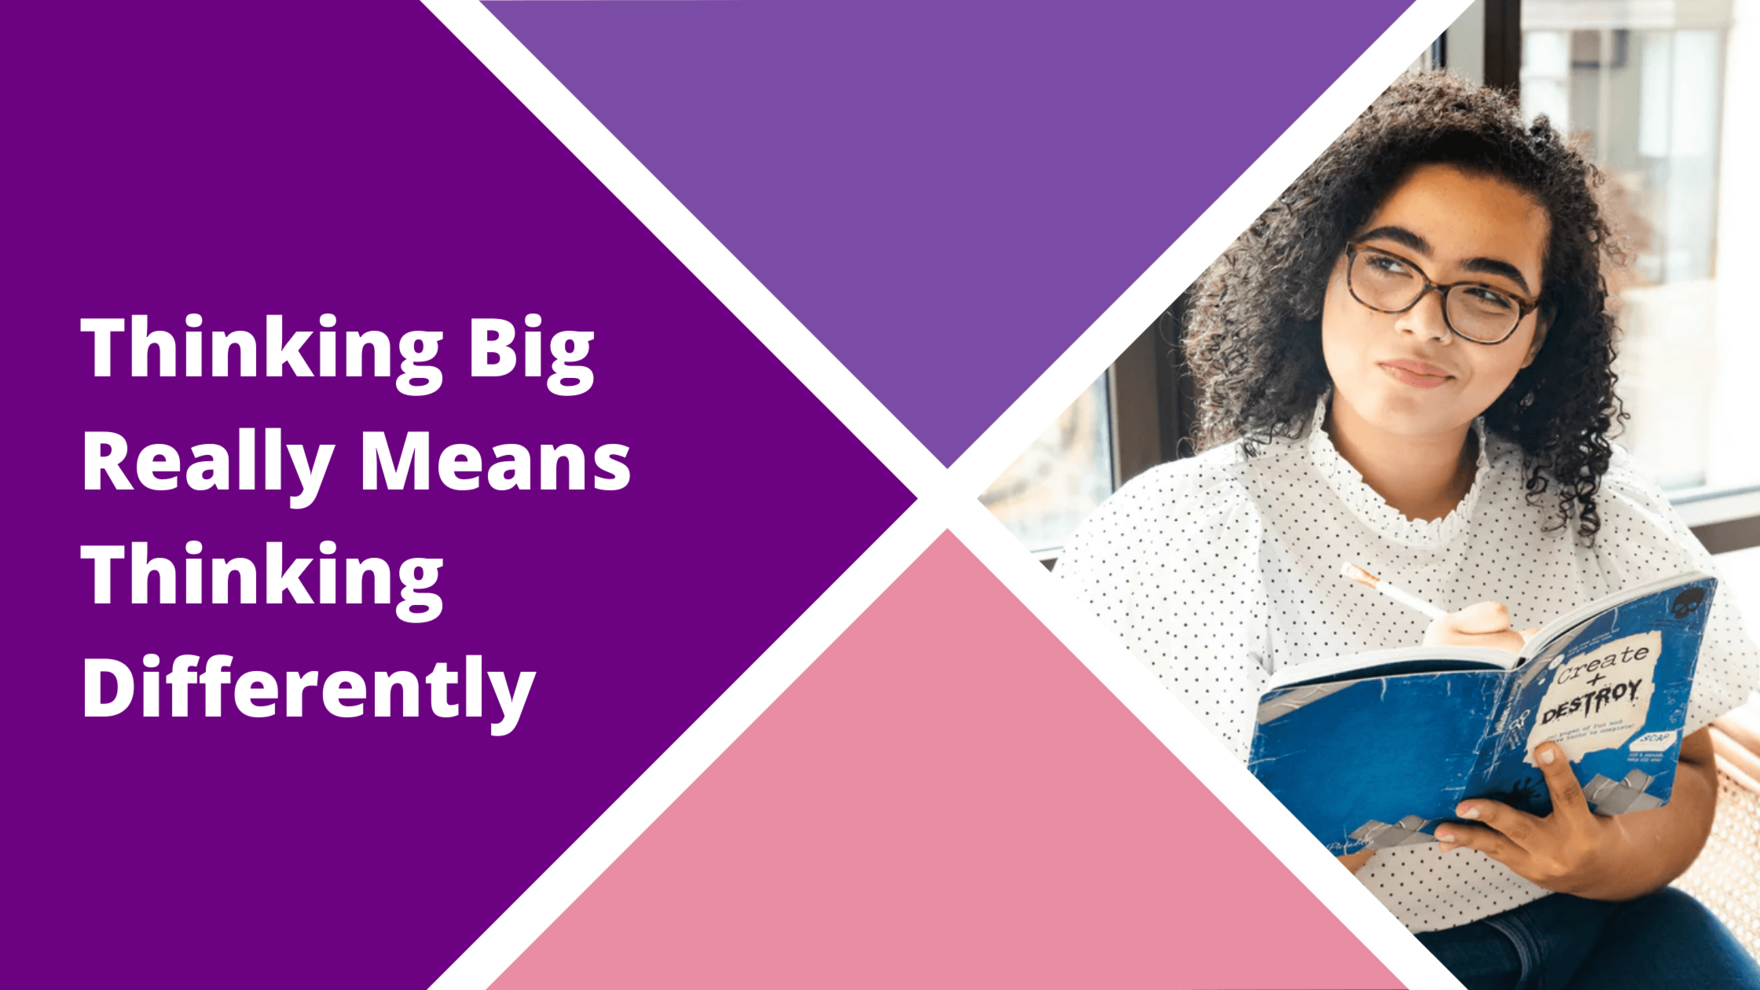 Think Big Blog - Thinking Big Really Means Thinking Differently